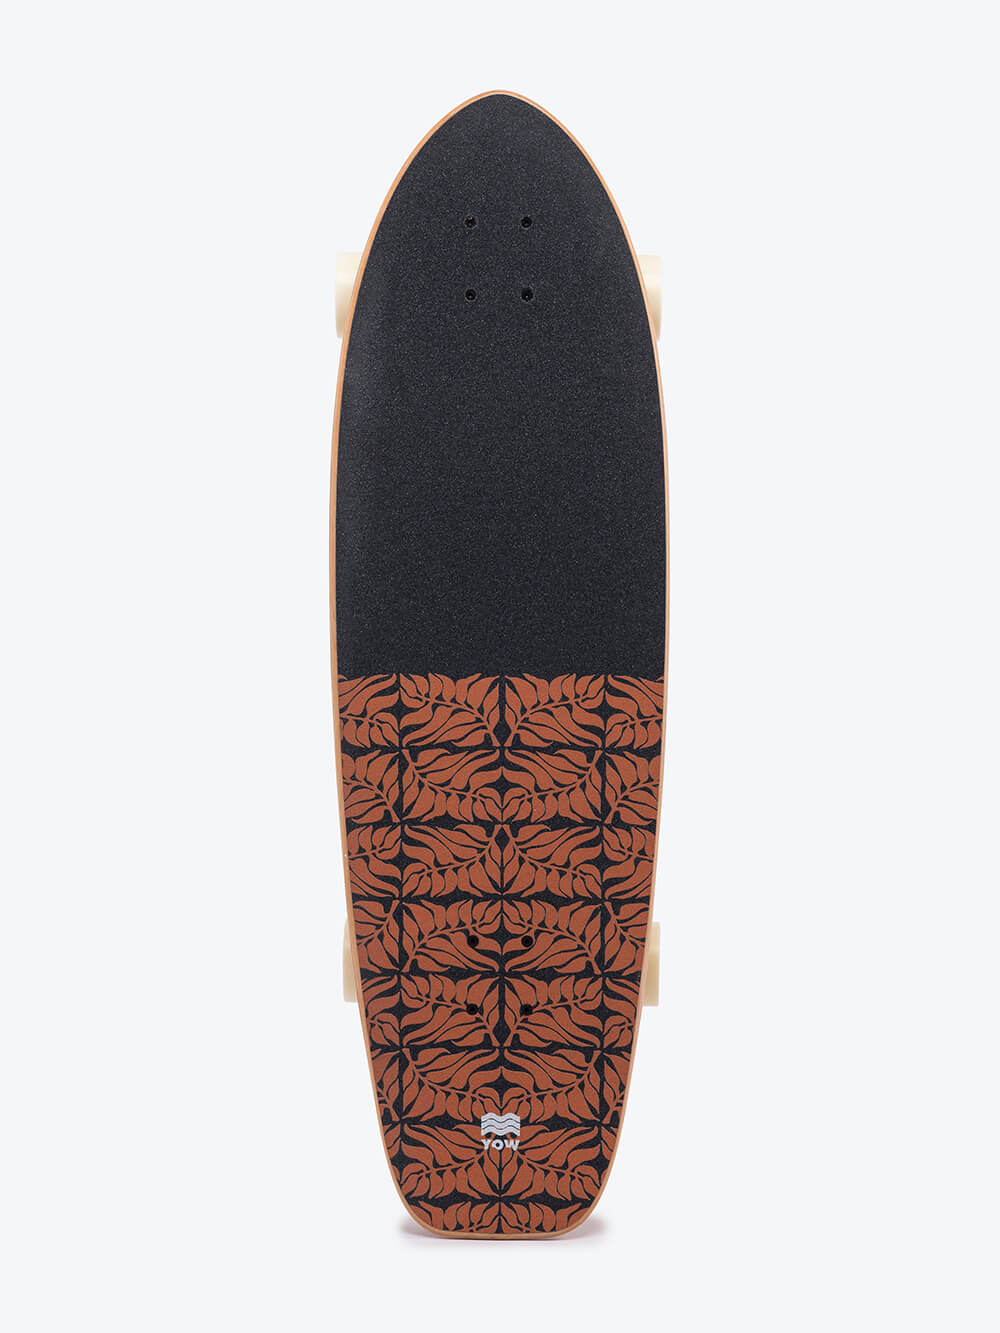 Multi All Sizes Yow Rapa Nui The First Surfskate Unisex Board Surf Skateboard 